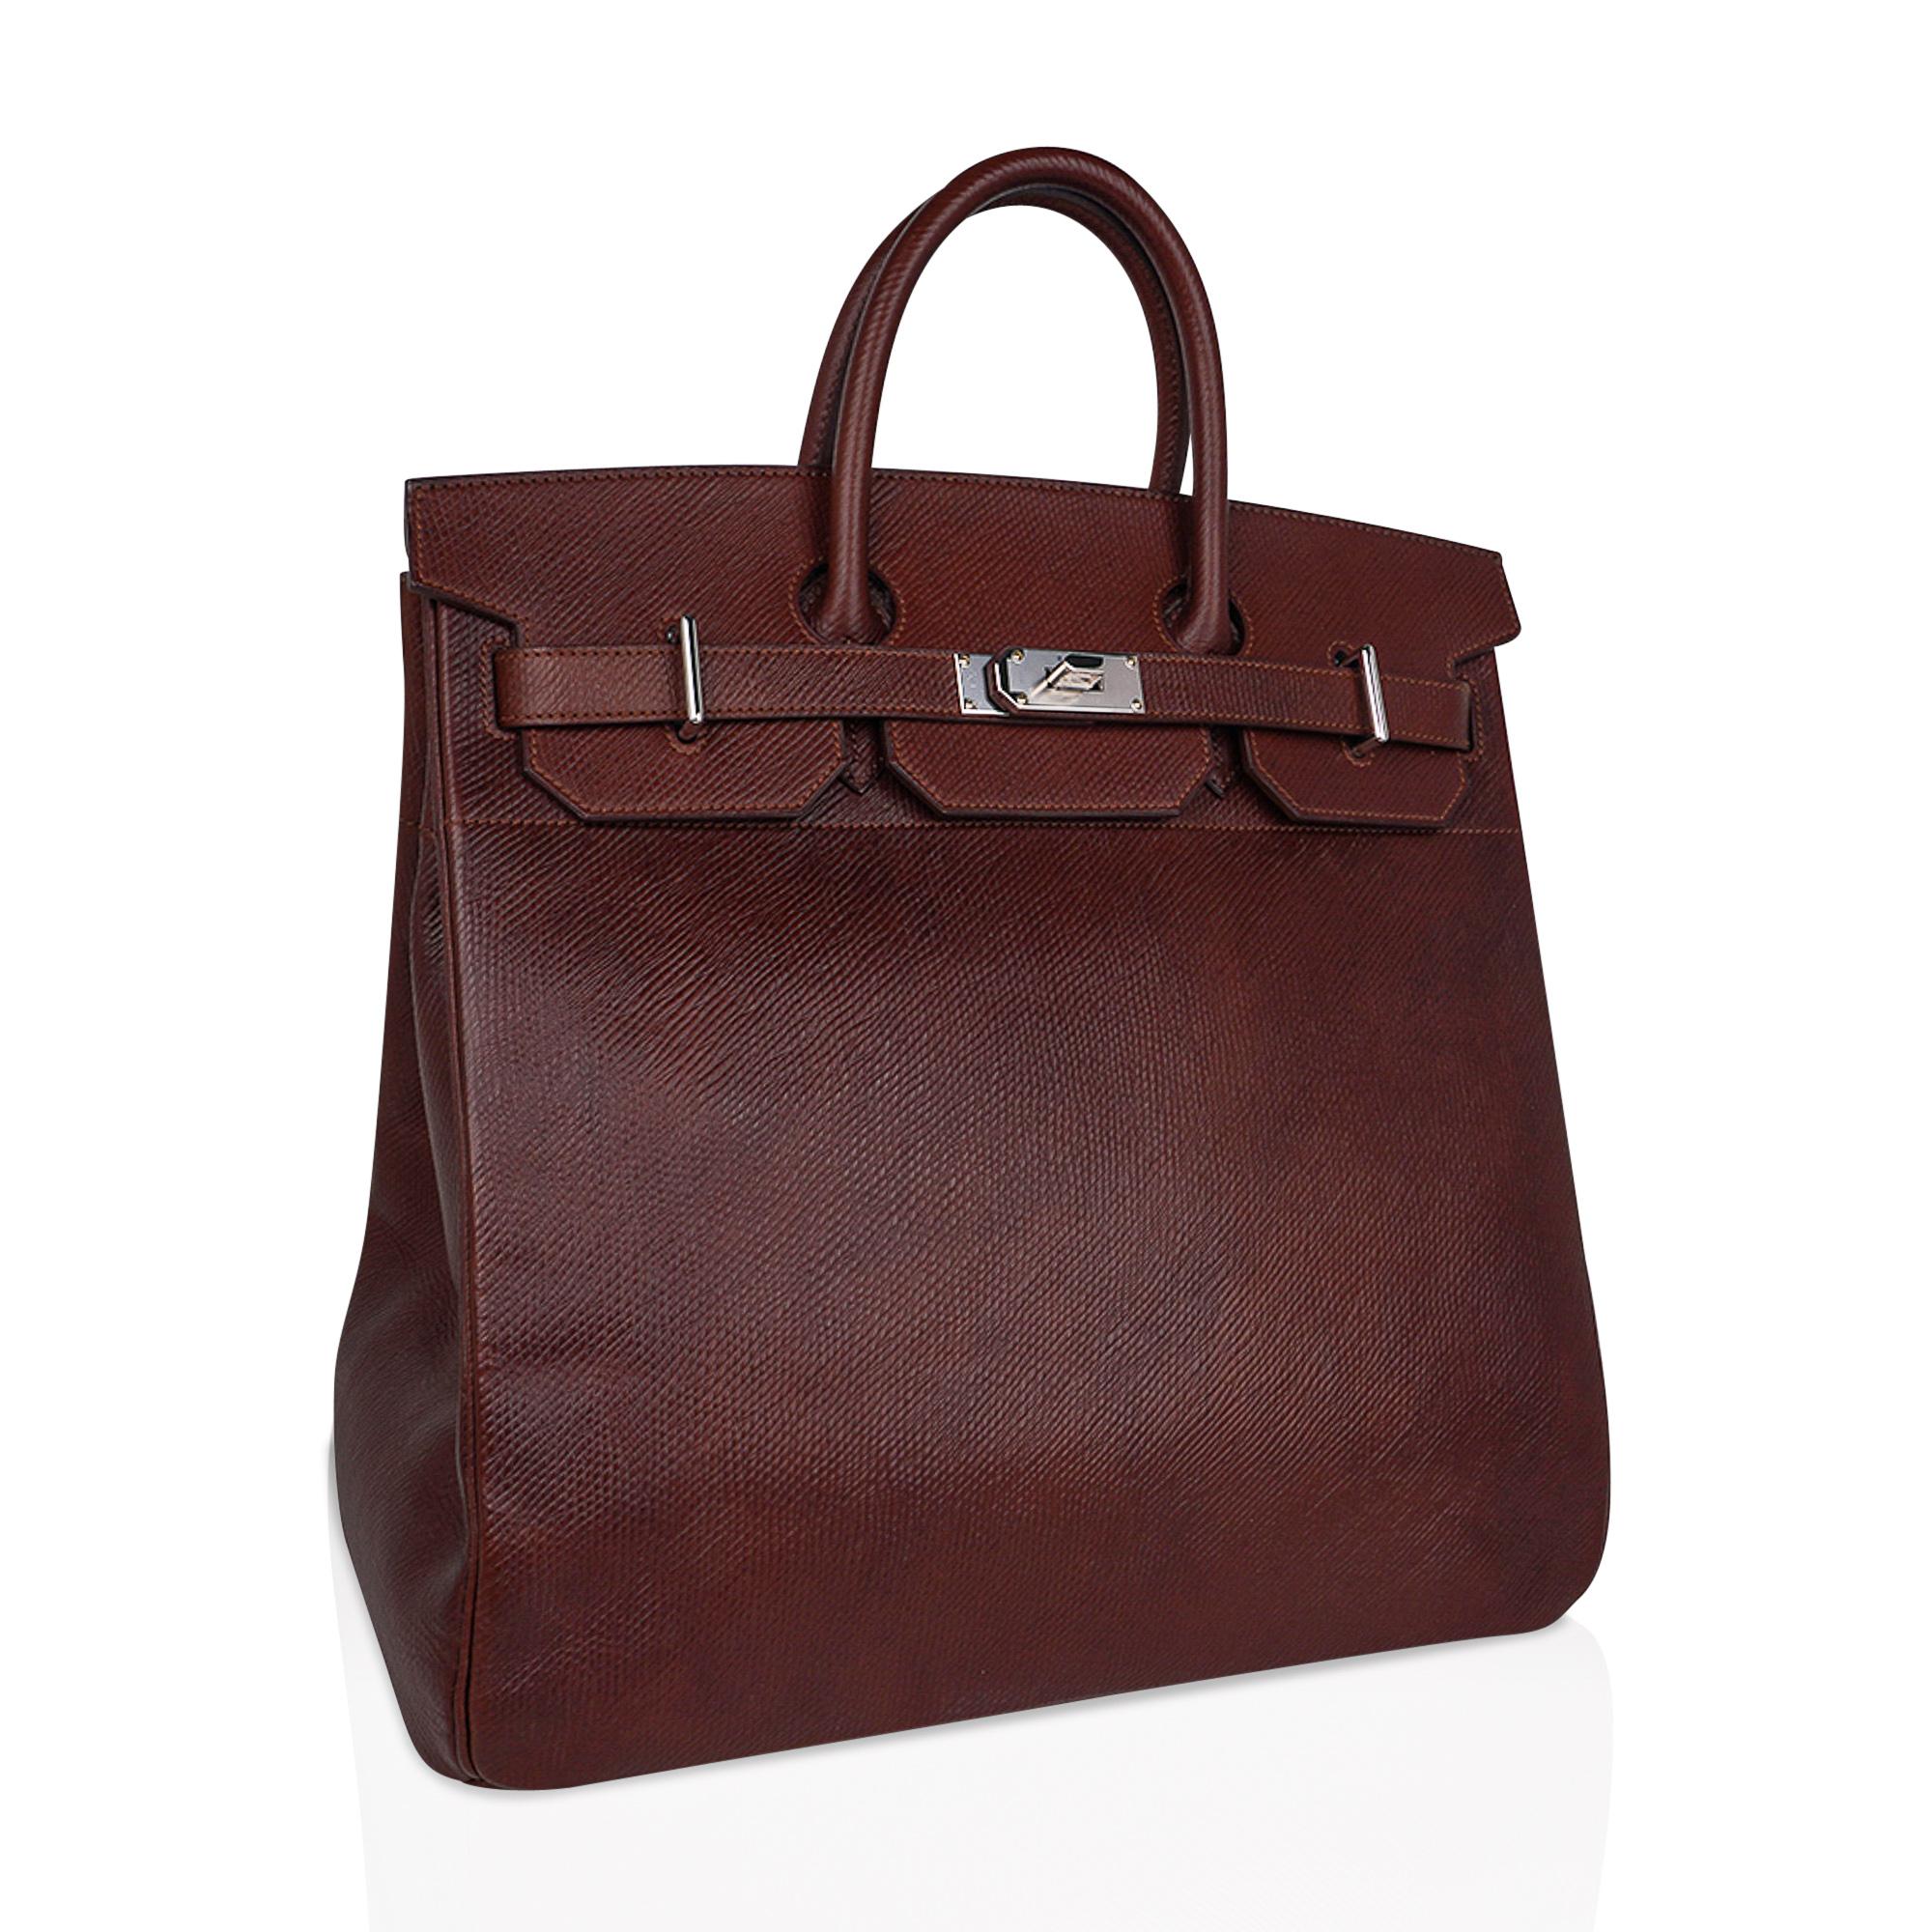 Mightychic offers a rare very limited edition Volynka Russian leather Hermes 40 HAC bag (Haut a Courroies).
It took Hermes six years to exhume its secrets to recreate this luxurious leather with the remarkable exotic aroma.
Your imagination takes